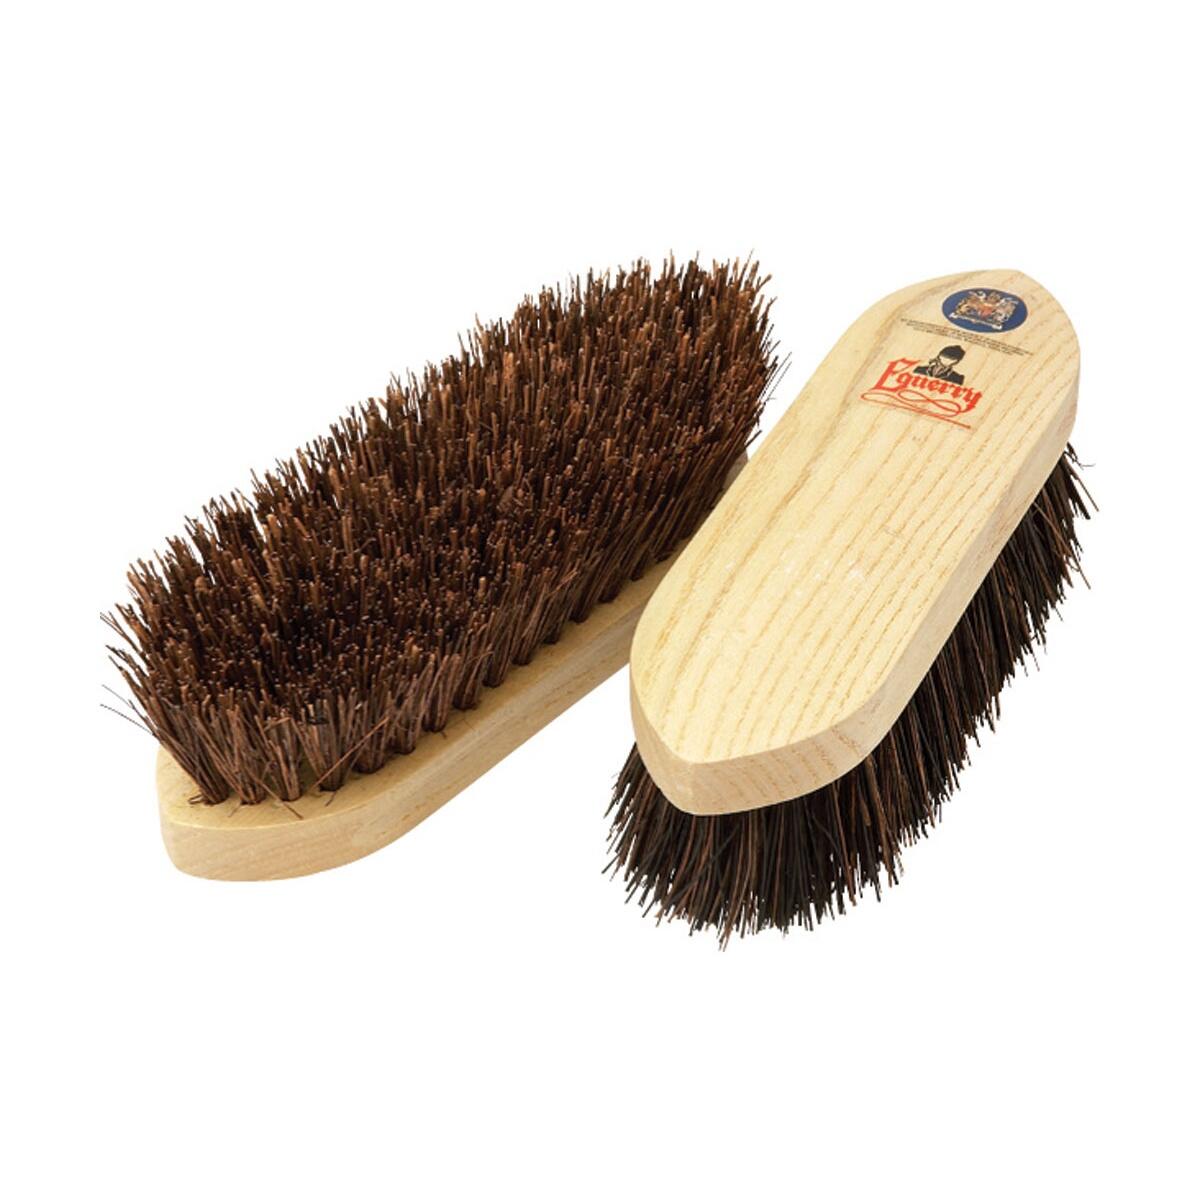 Equerry Wooden Bassine Dandy Brush (Brown) 1/1